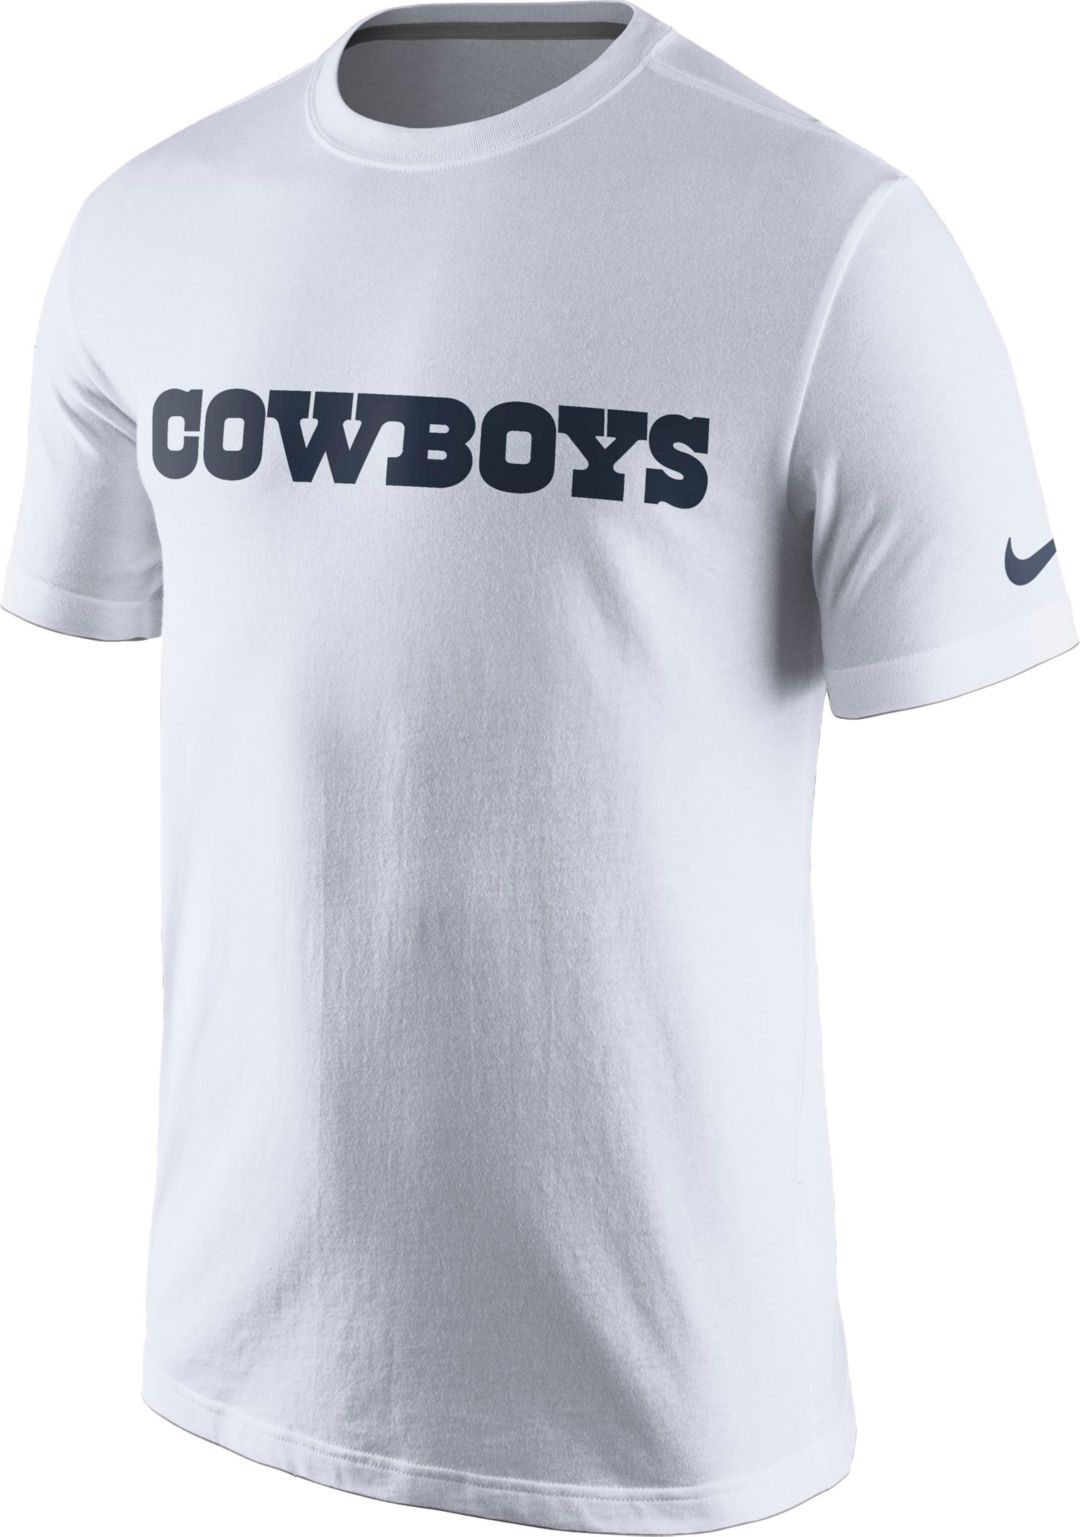 Best Of White Dallas Cowboys Shirt | Gallery Arts